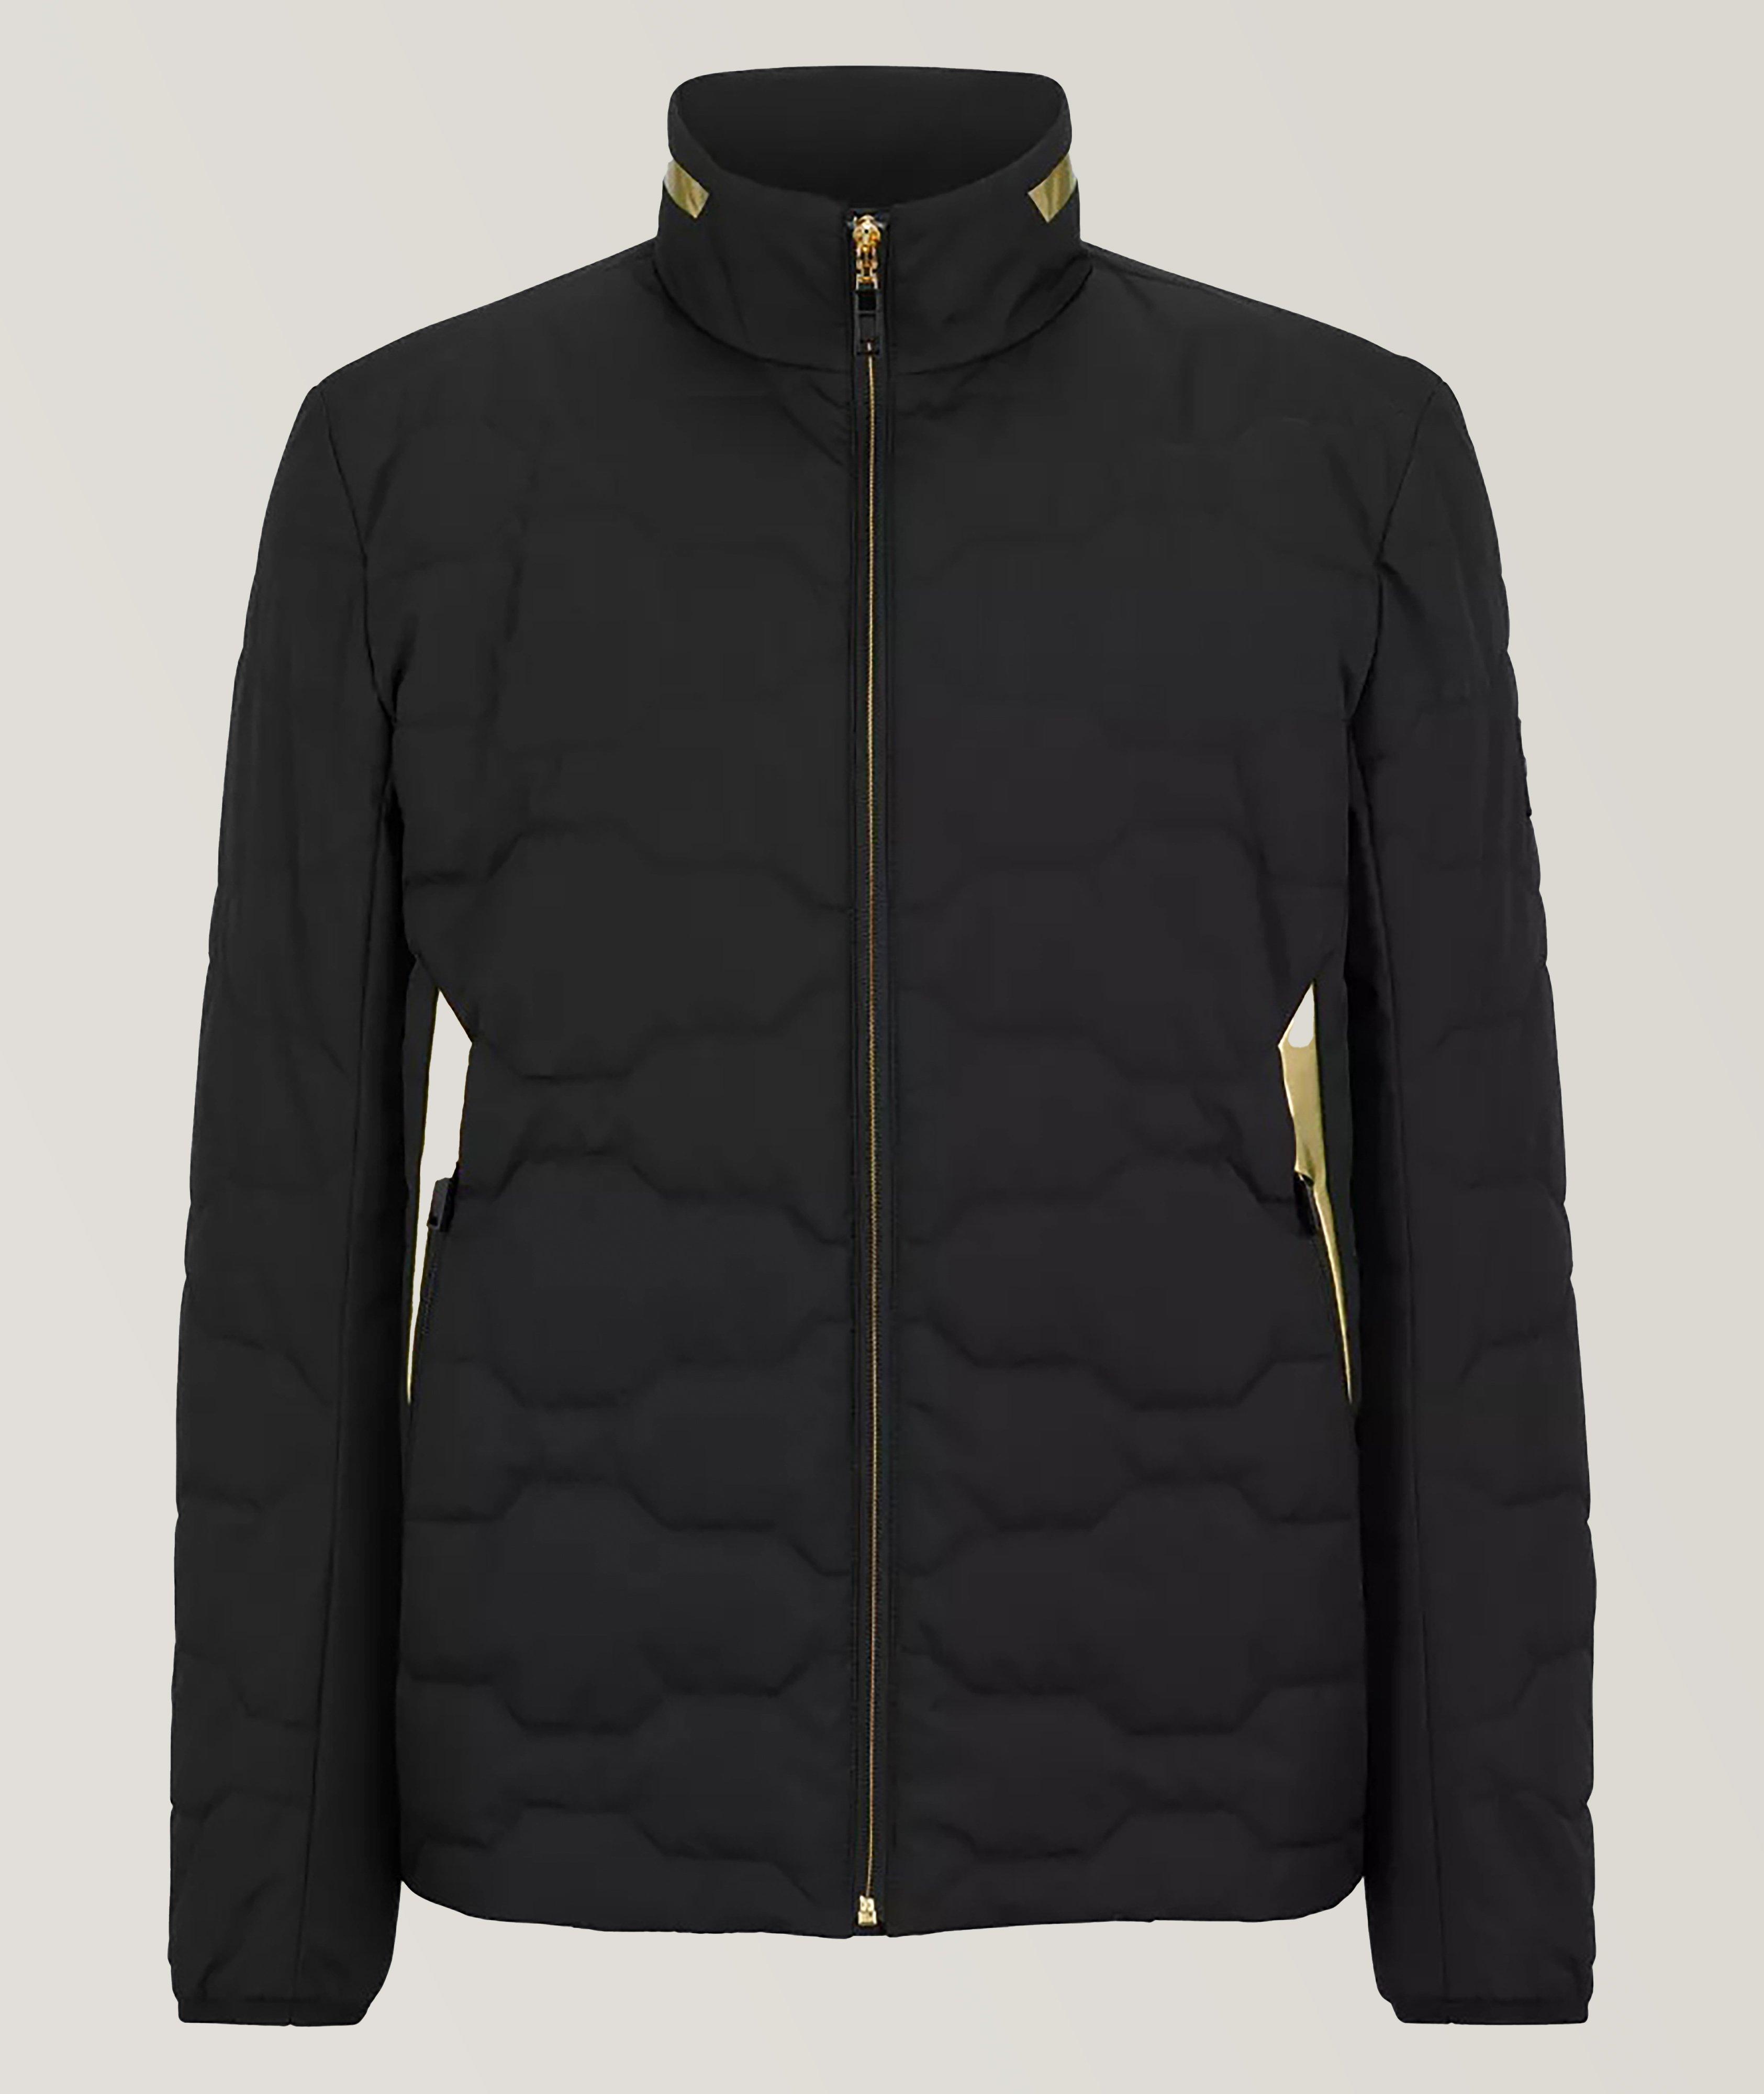 Water-Repellent Heating System Jacket image 0